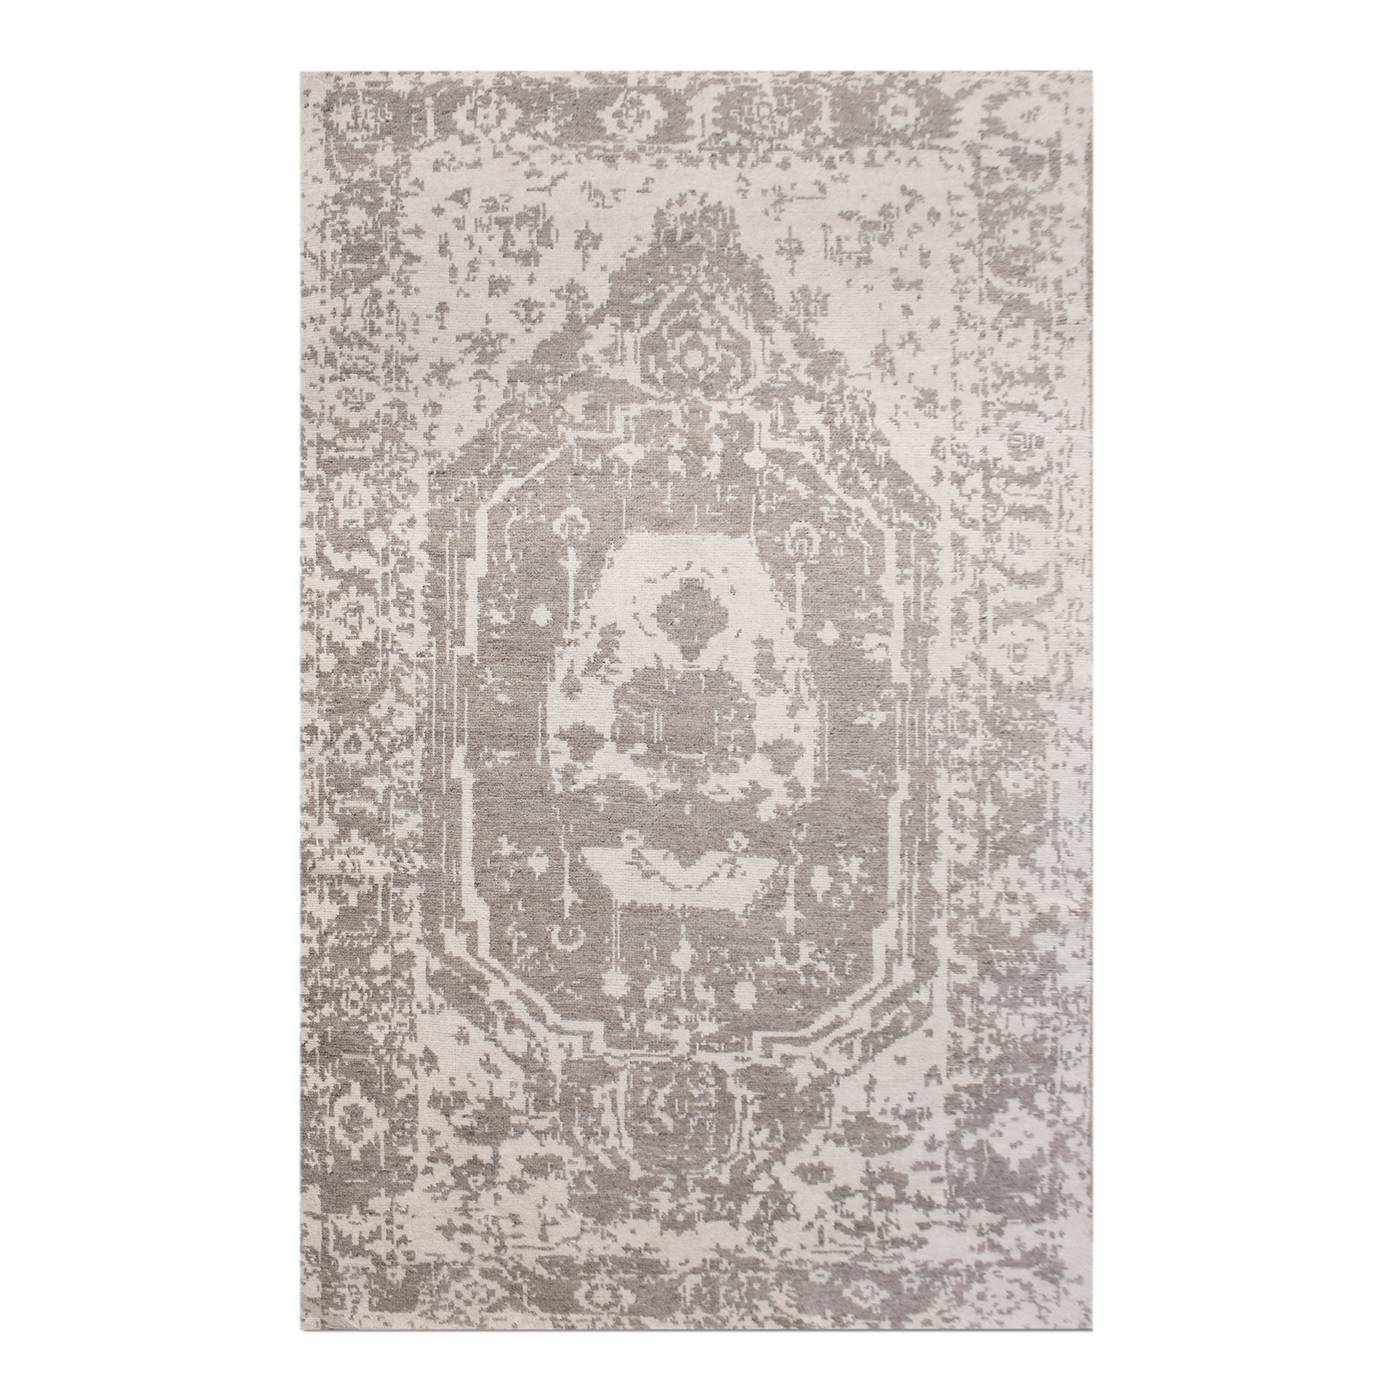 Area Rug, Bedroom Rug, Living Room Rug, Living Area Rug, Indian Rug, Office Carpet, Office Rug, Shop Rug Online, Natural White, Beige , Wool, Hand Knotted , Handknotted, All Cut, Intricate 